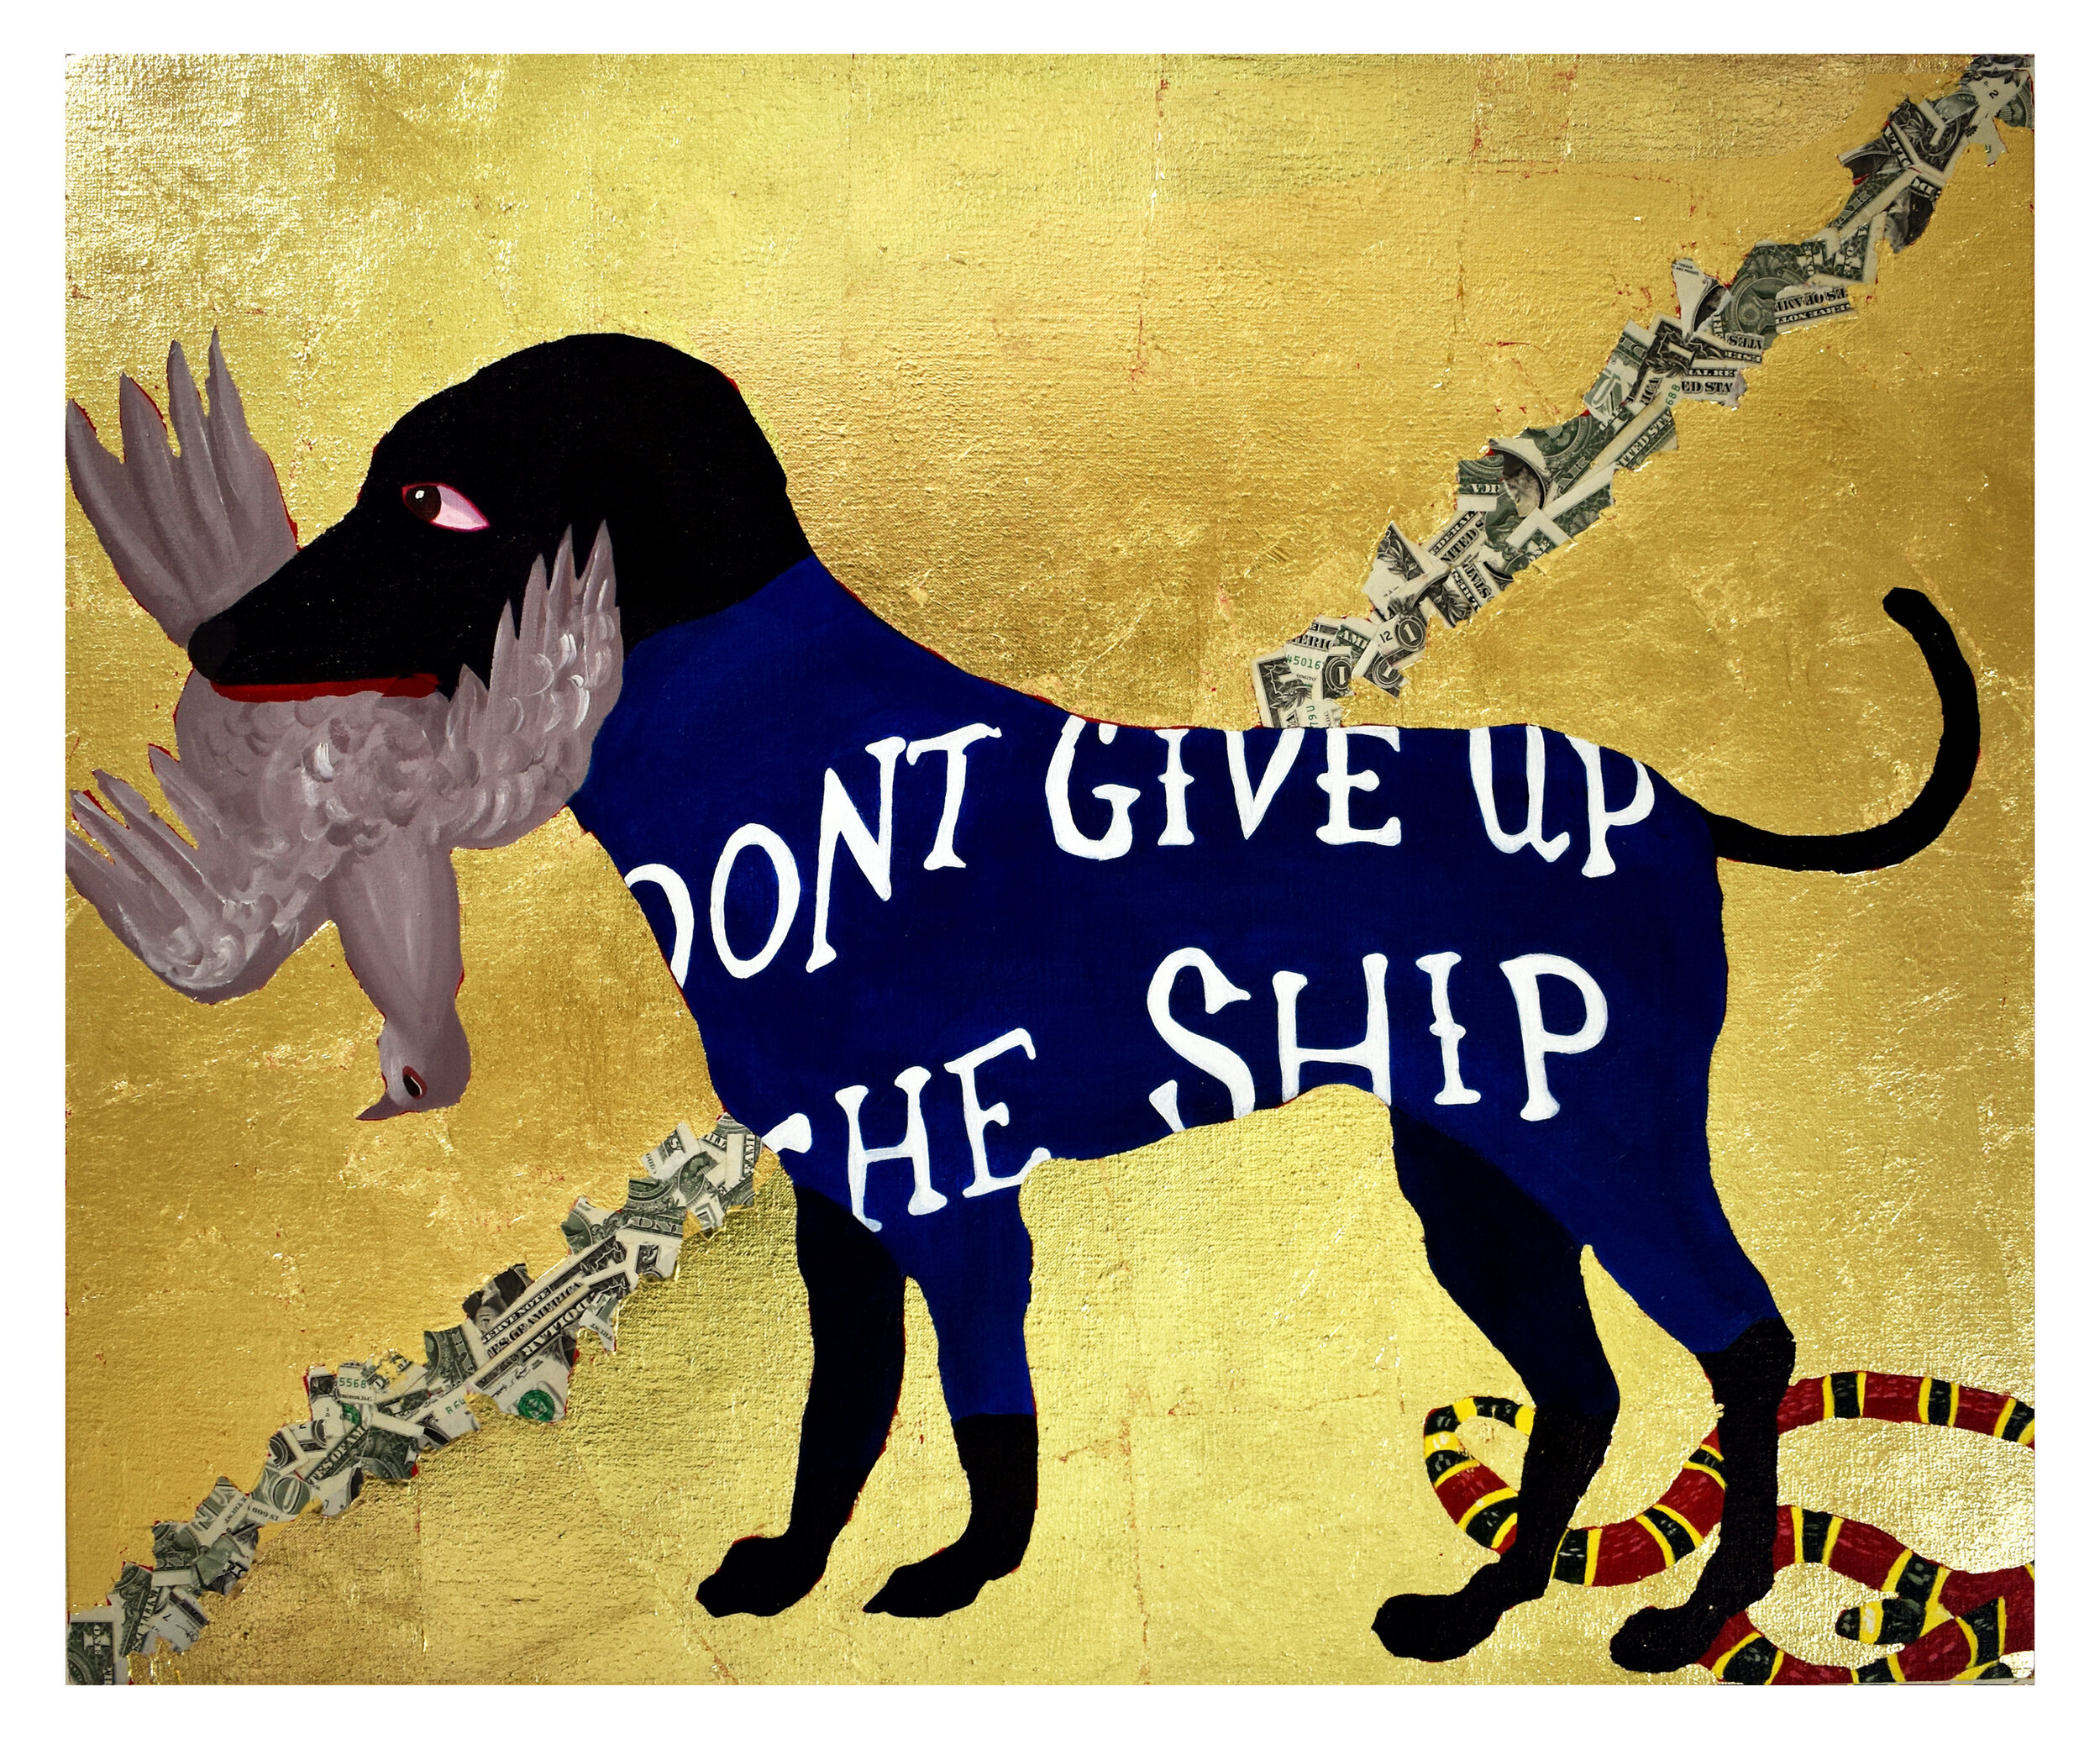   The Painted Westwood Dog (Don’t Give up the Ship) , 2019  27 x 33 x 1.5 inches (68.58 x 83.82 x 3.81 cm.)  Acrylic, dollar bills, and gold leaf on linen 